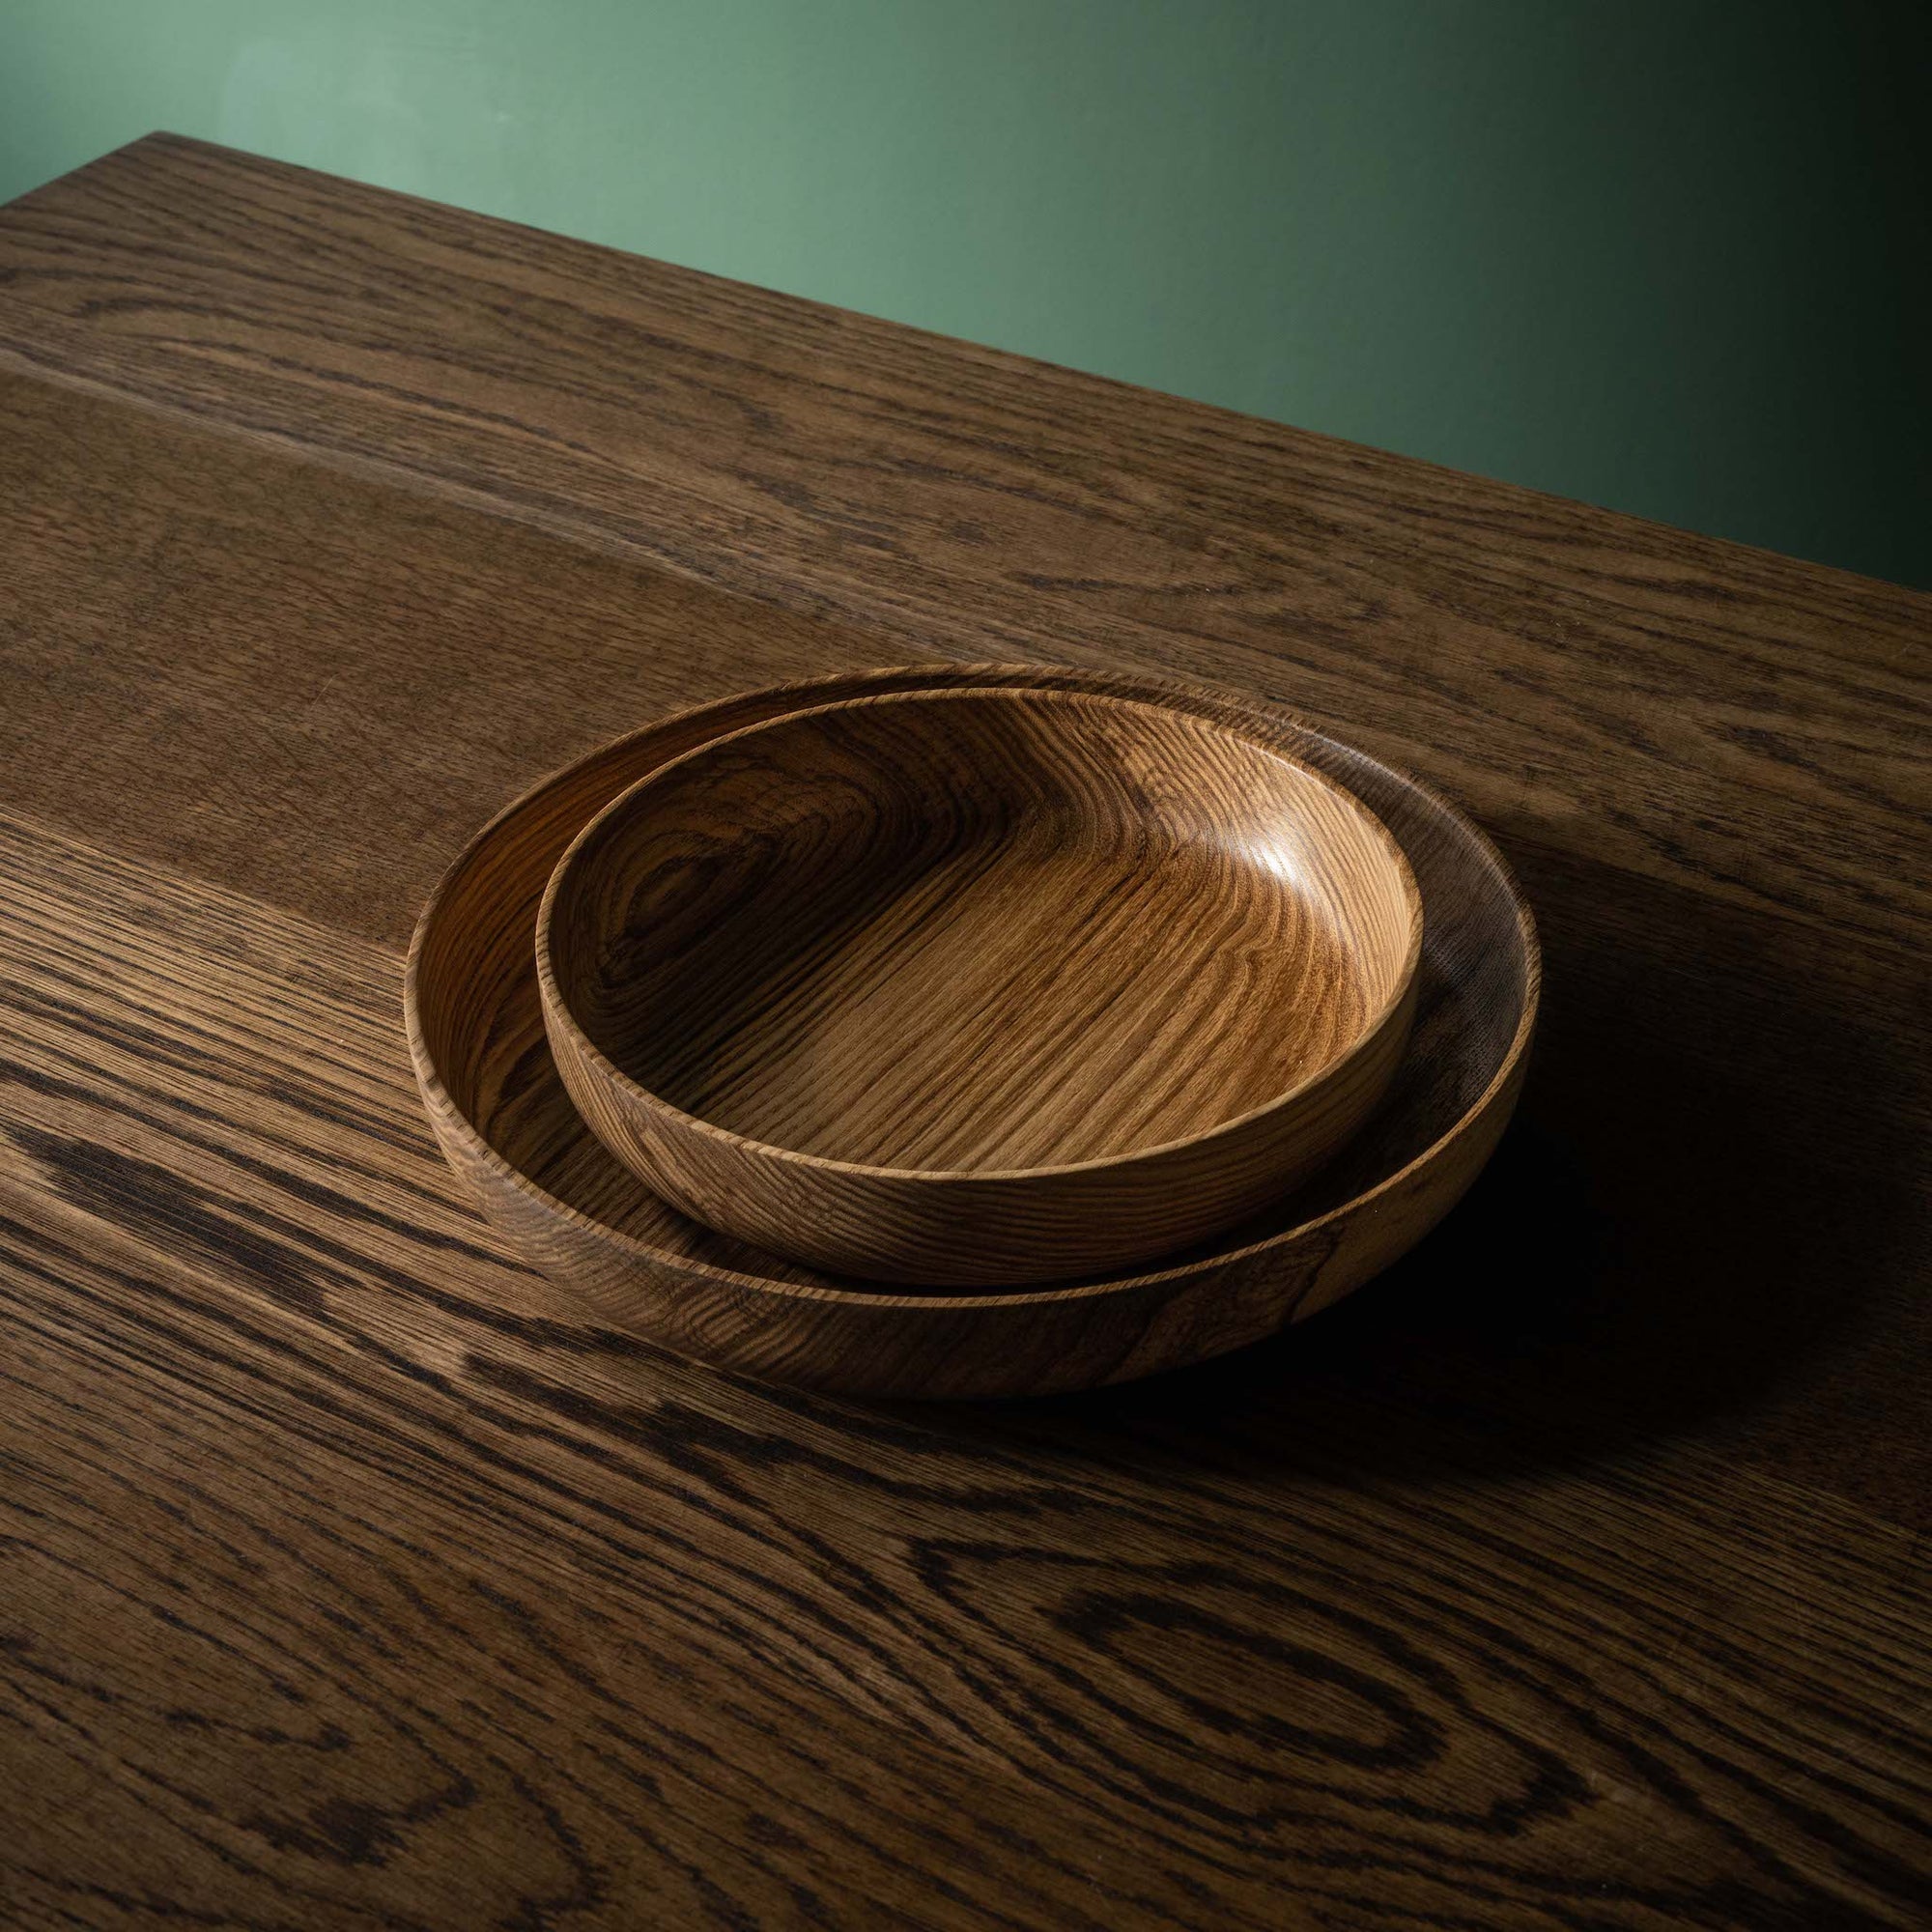 Selwyn House Large & Small Olive Ash Serving Trays